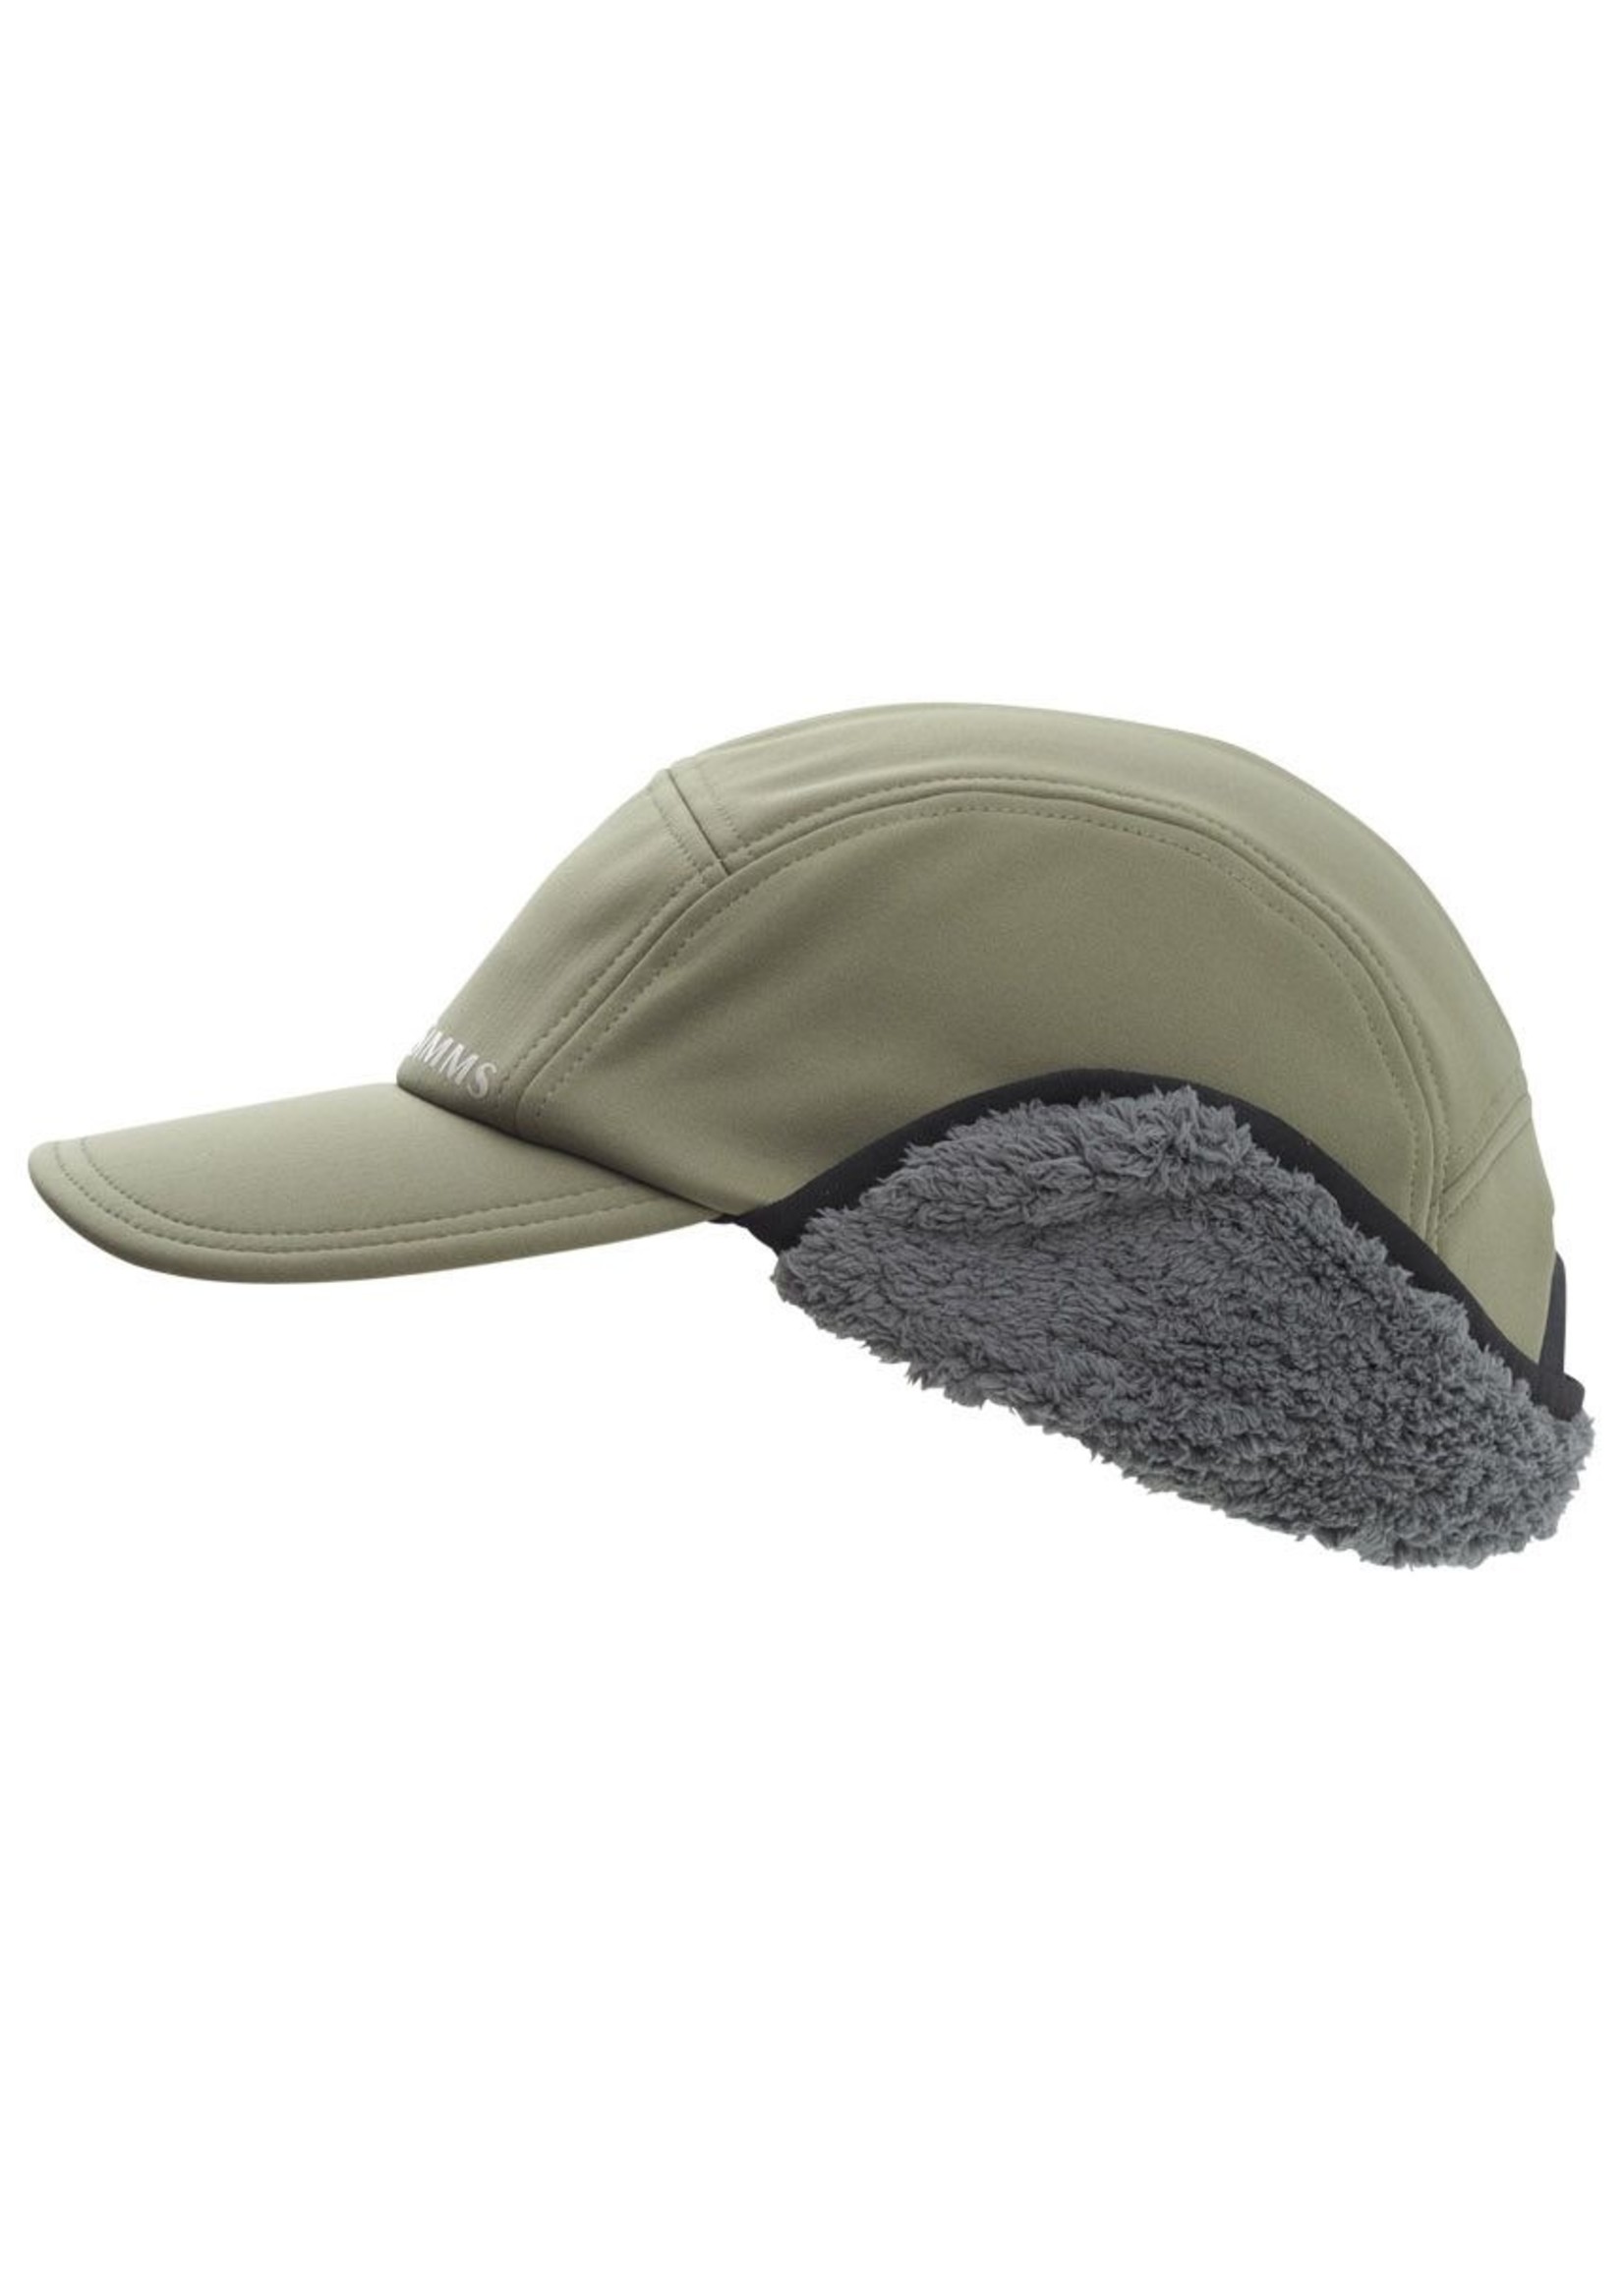 Simms Guide Windbloc® Hat - Great Feathers